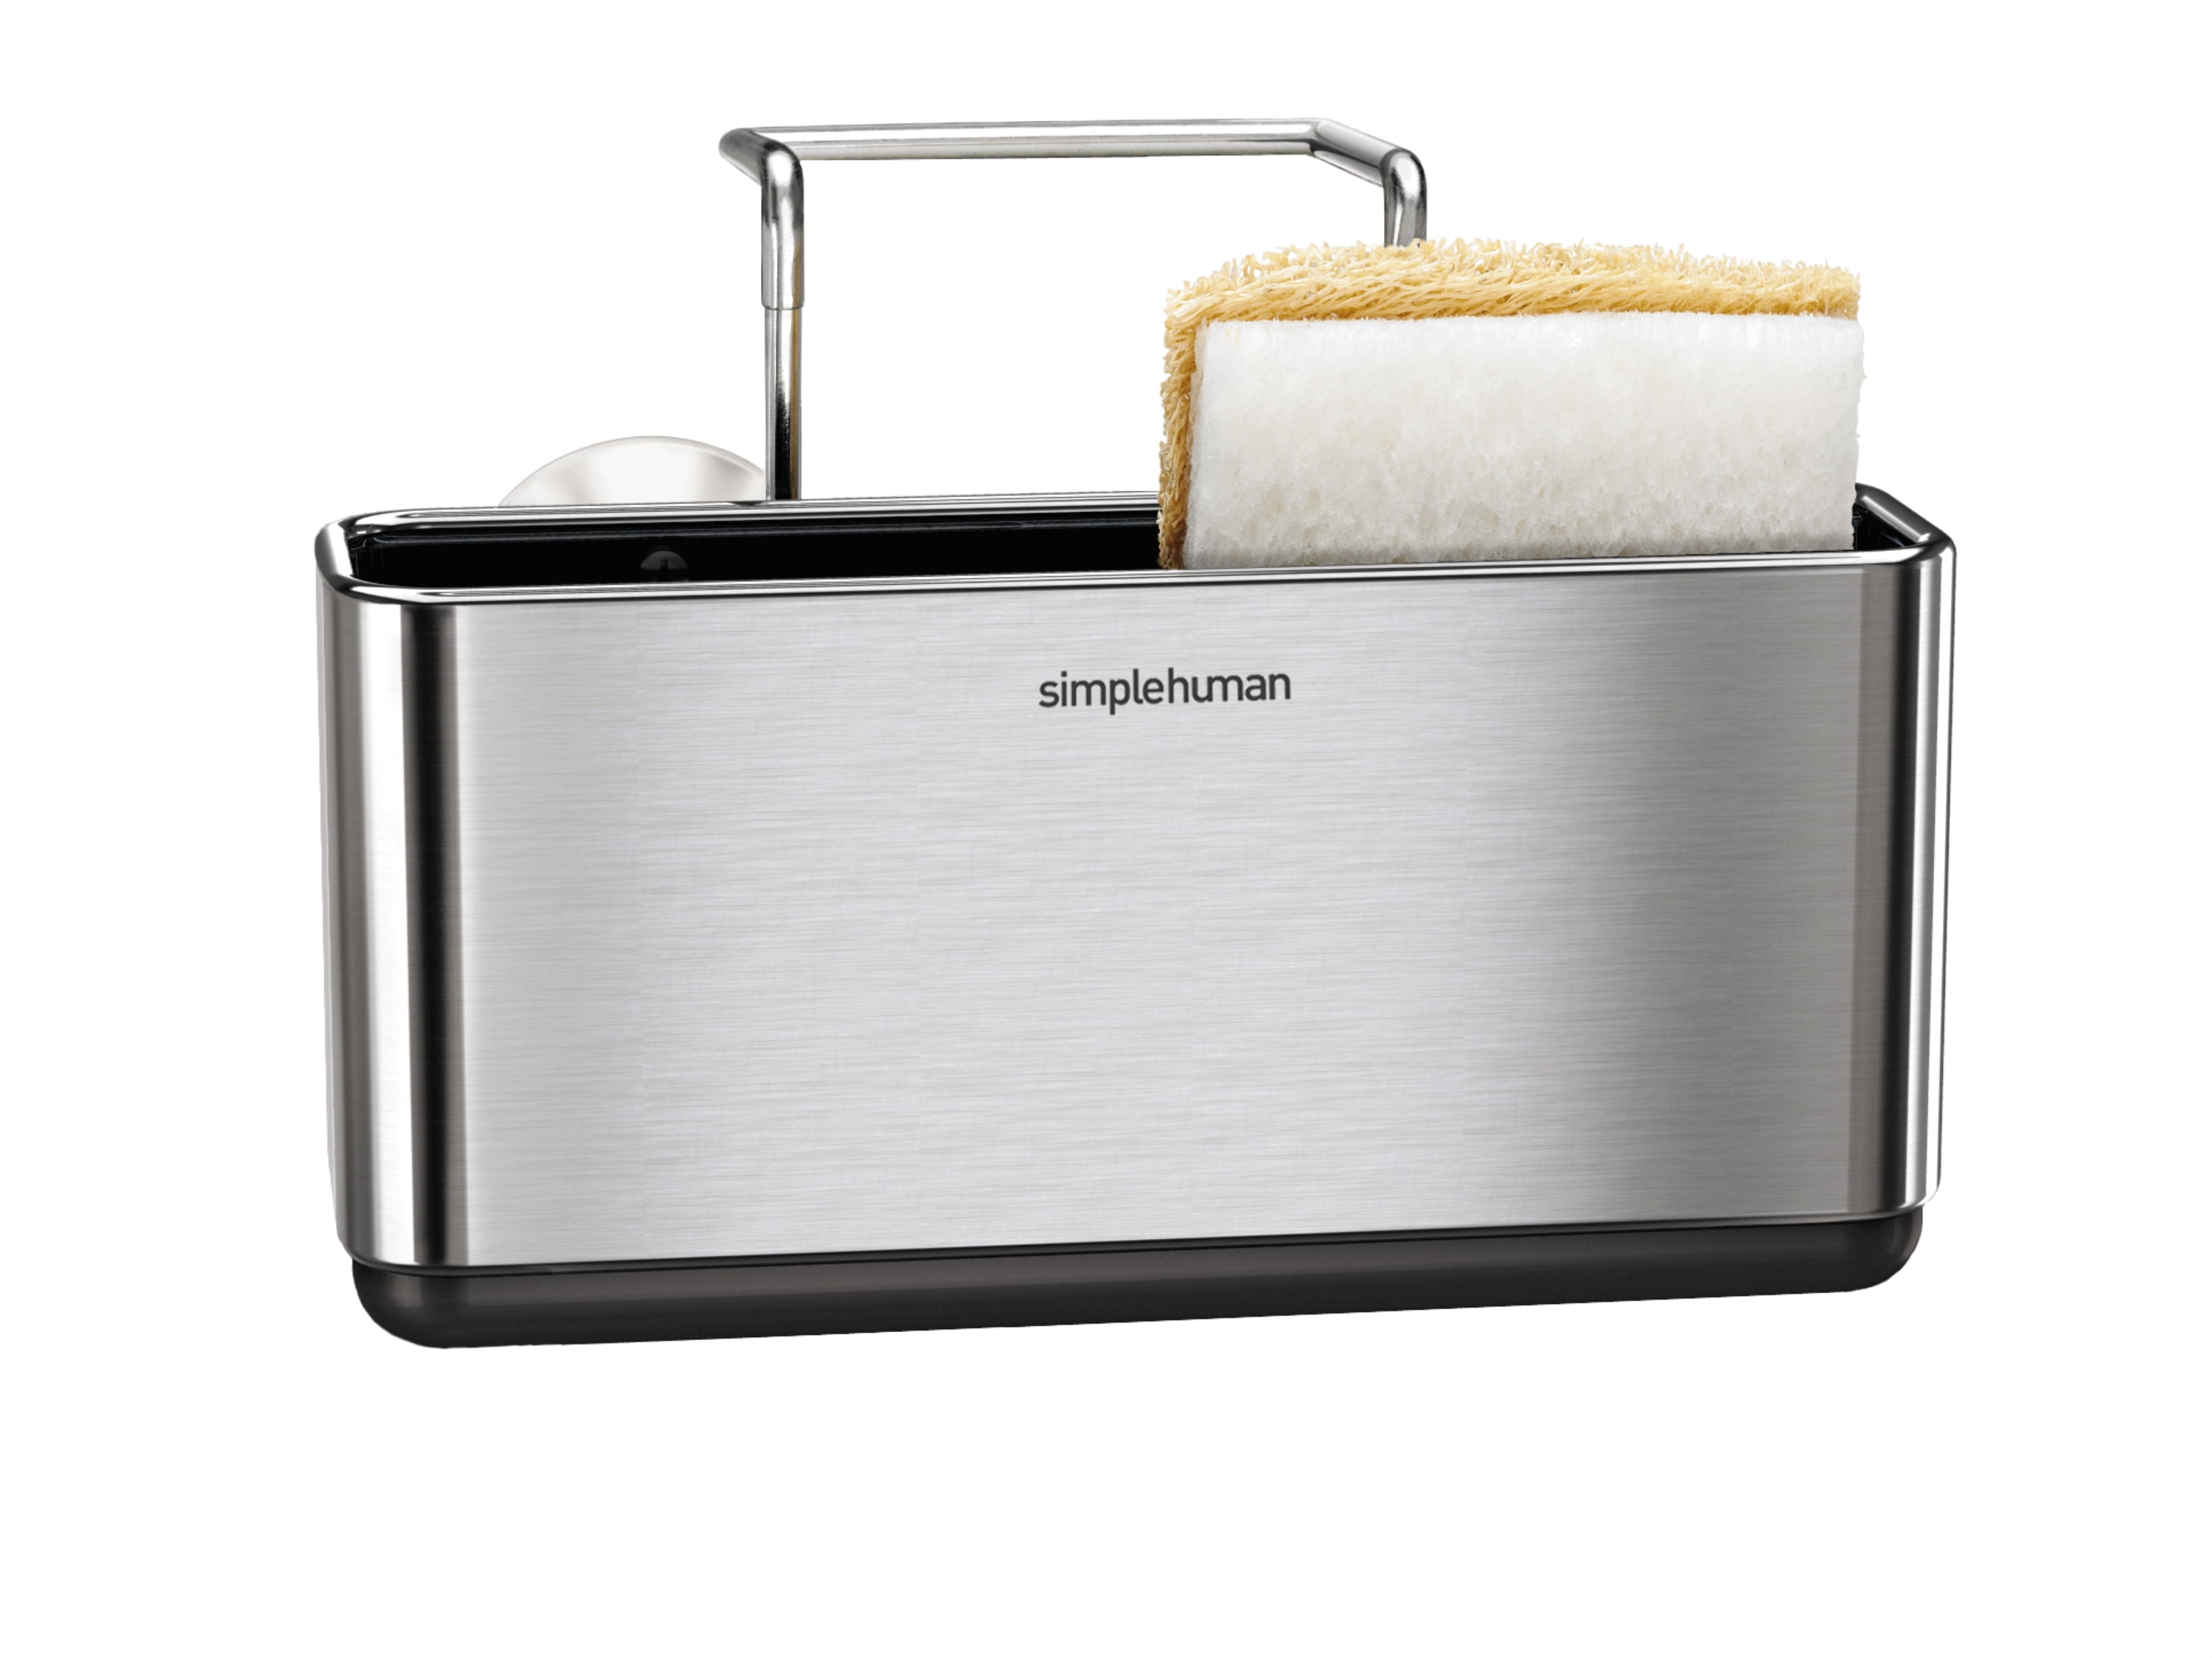 simplehuman Slim Sink Caddy Brushed Stainless Steel 